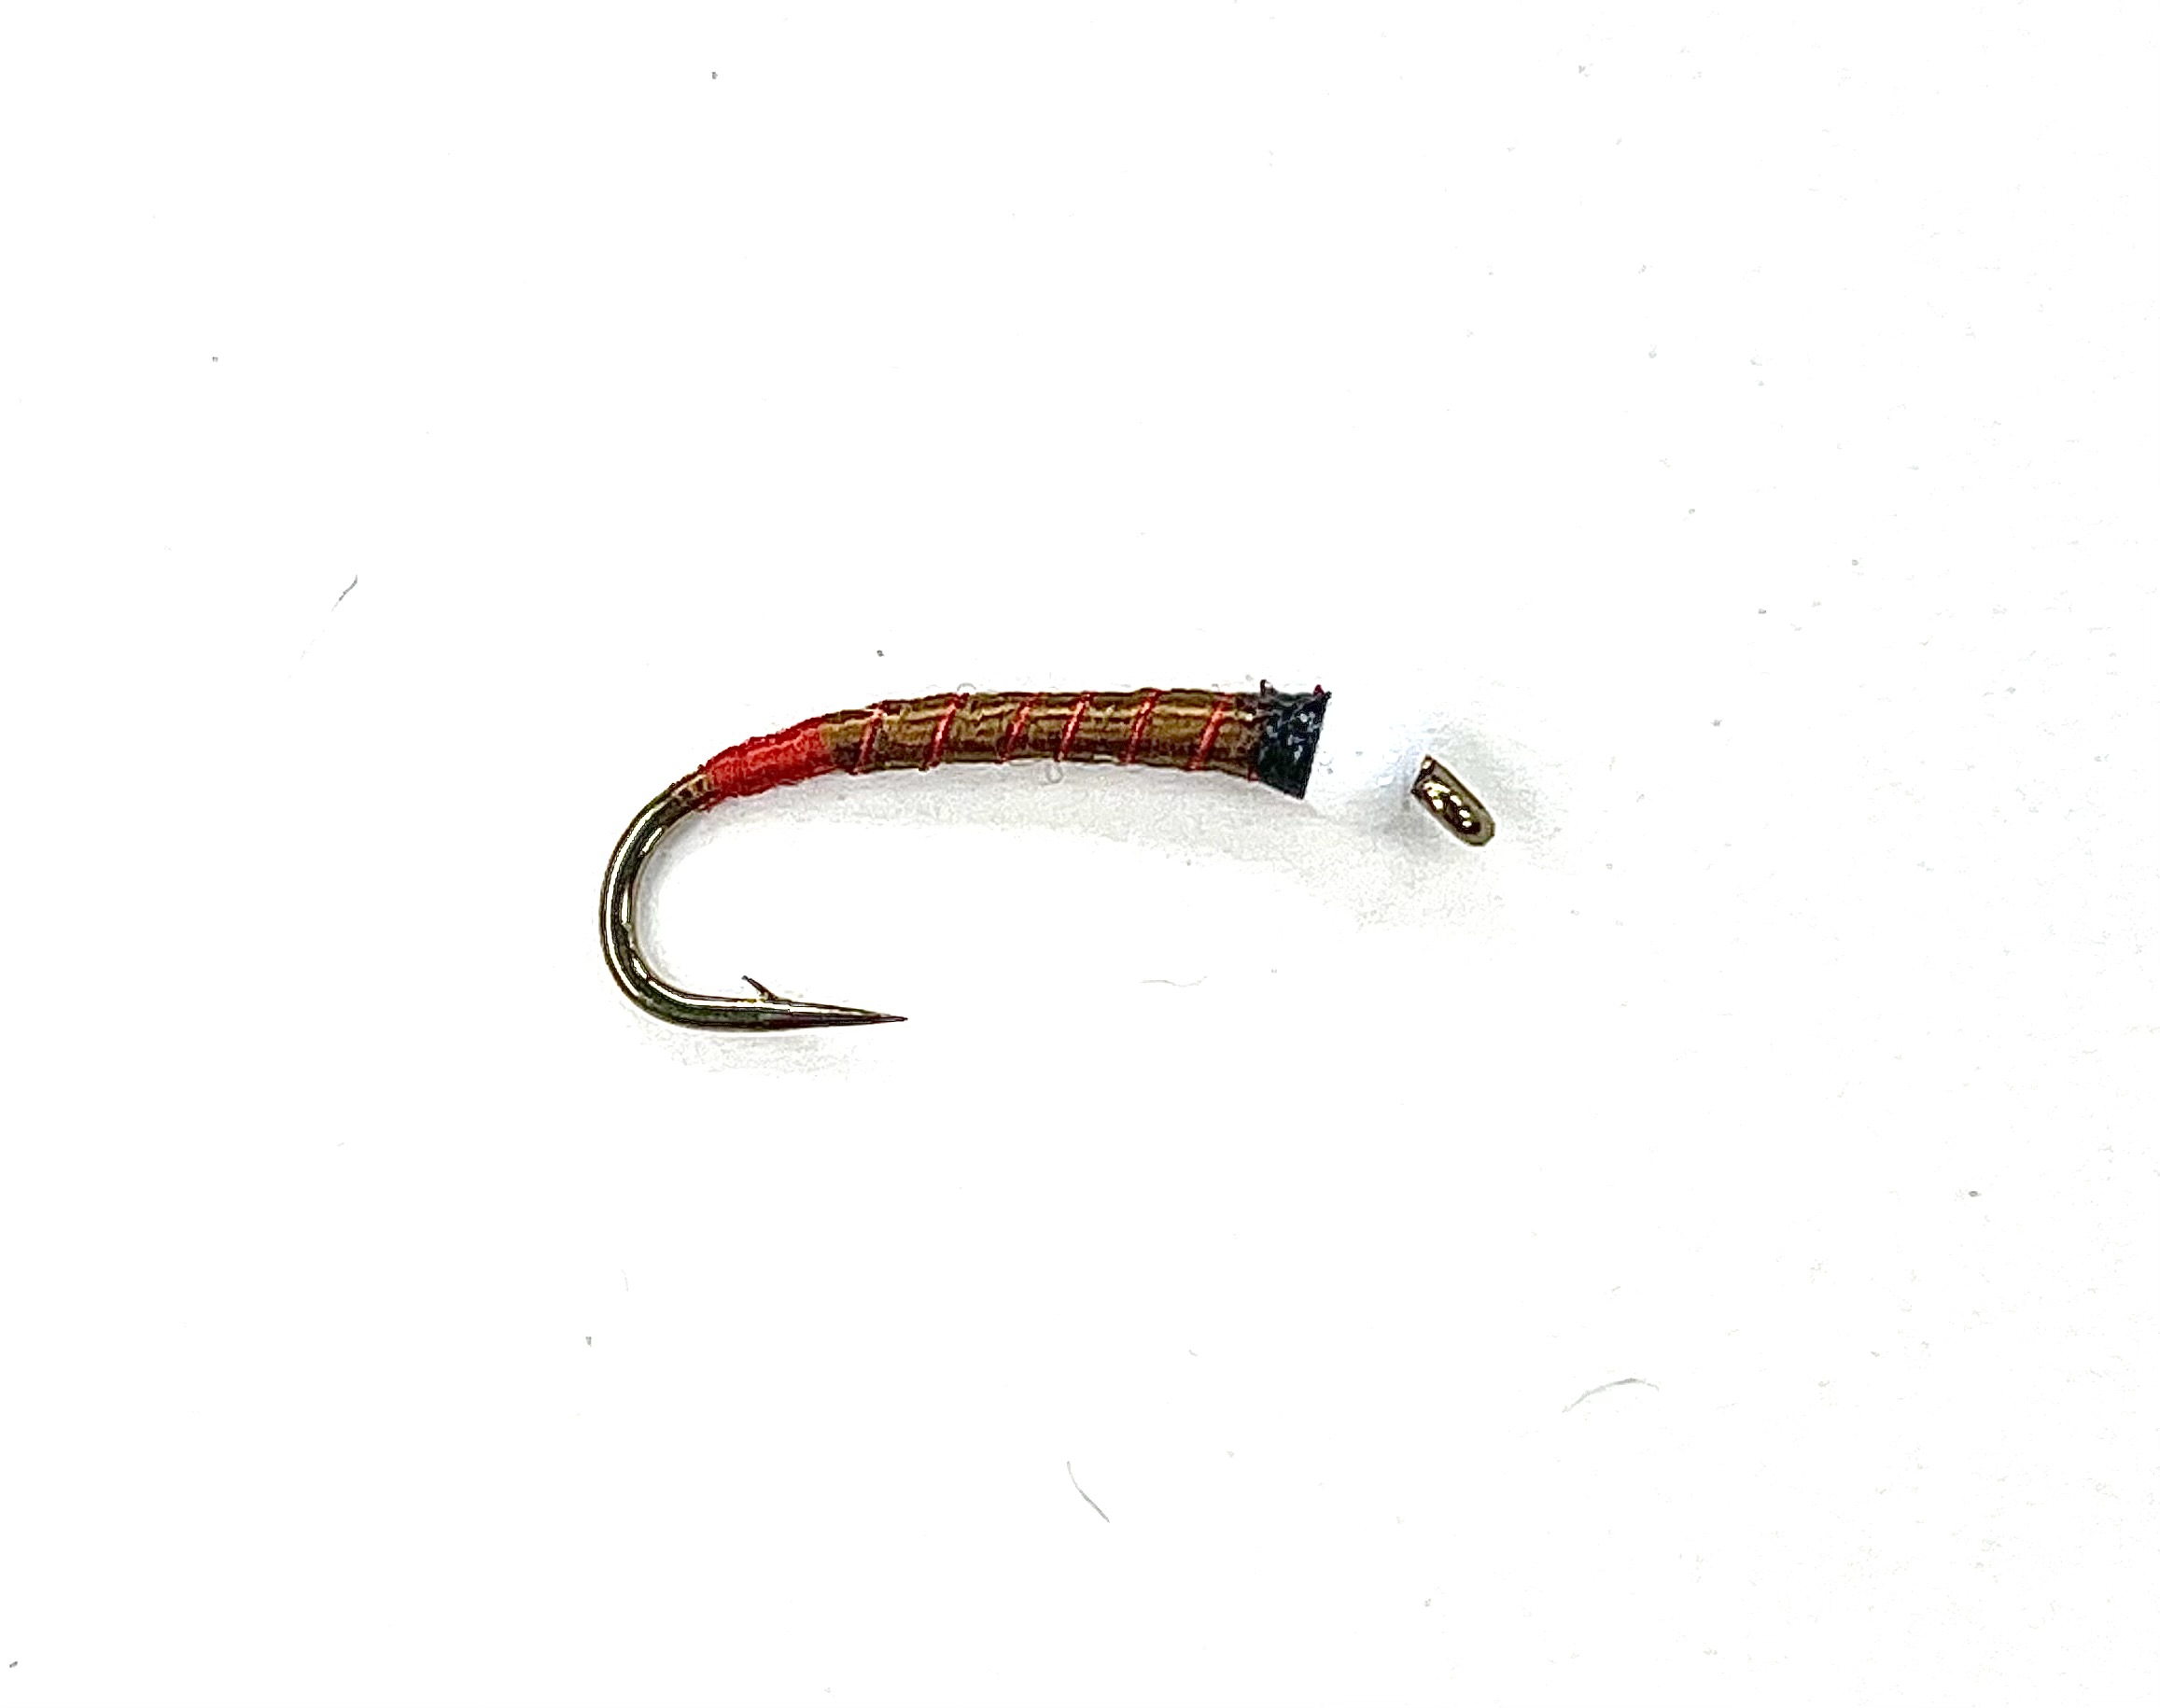 FAD Candy Cone Red Butt Chironomid - Brown/Red Wire - Size 16